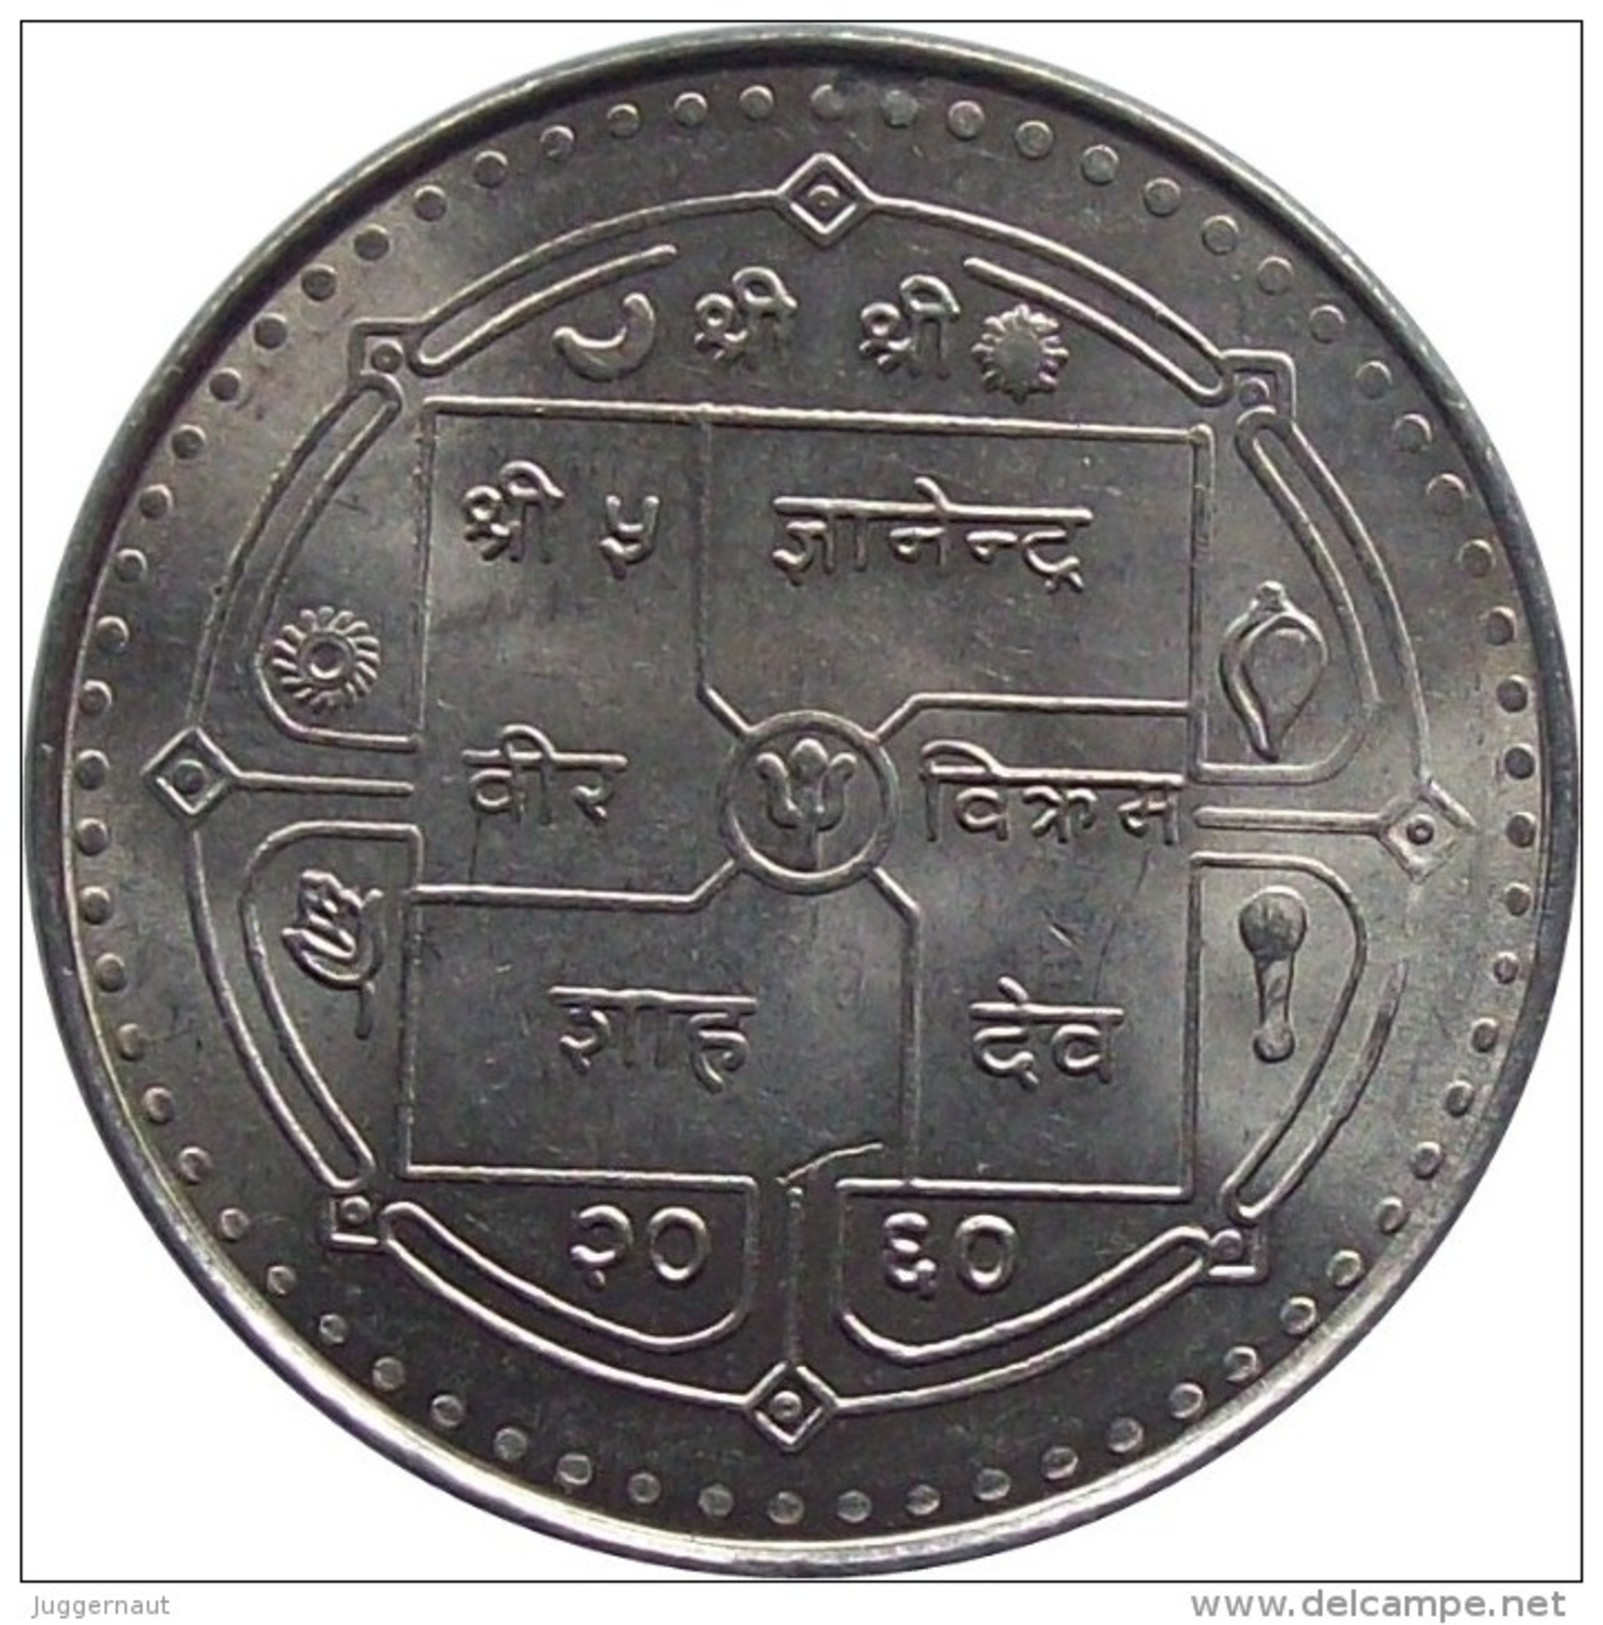 NEPAL EYE CARE SOCIETY SILVER JUBILEE COMMEMORATIVE COIN NEPAL 2003 KM-1164 UNCIRCULATED UNC - Nepal